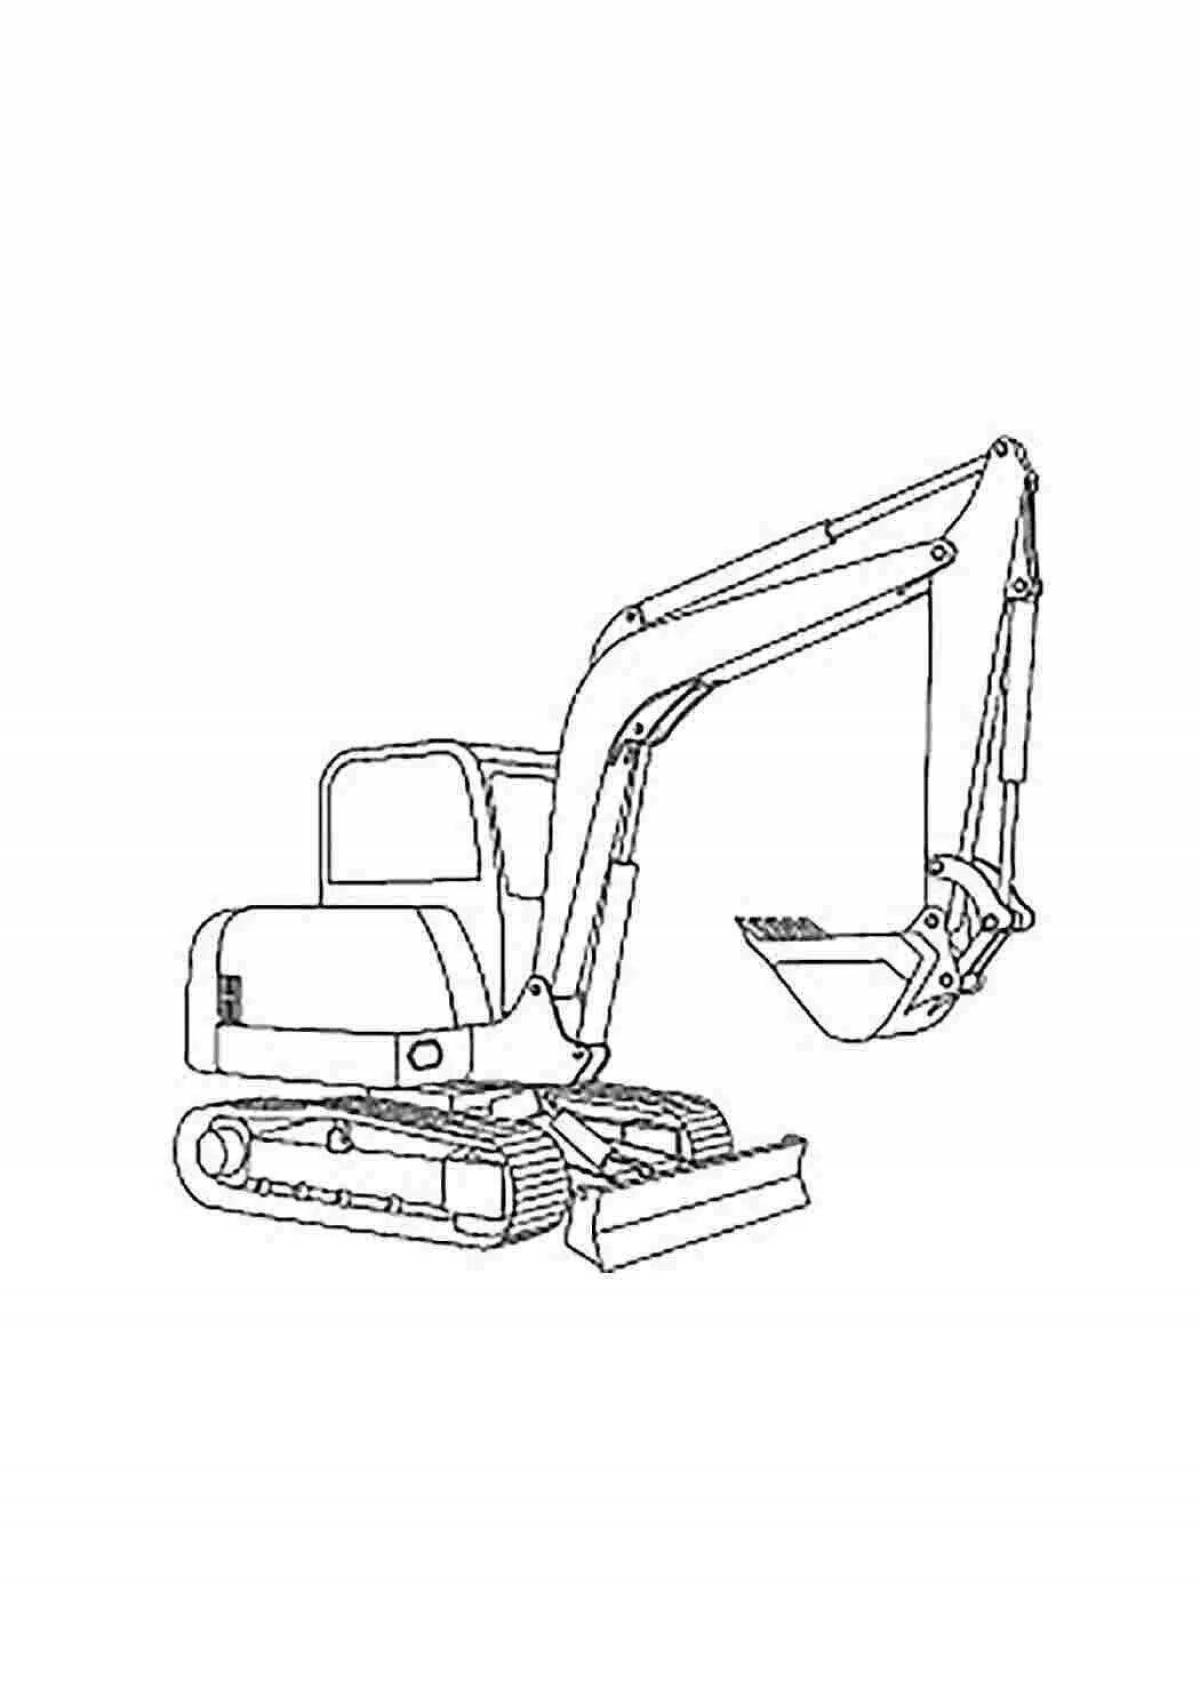 Outstanding excavator coloring book for 4-5 year olds